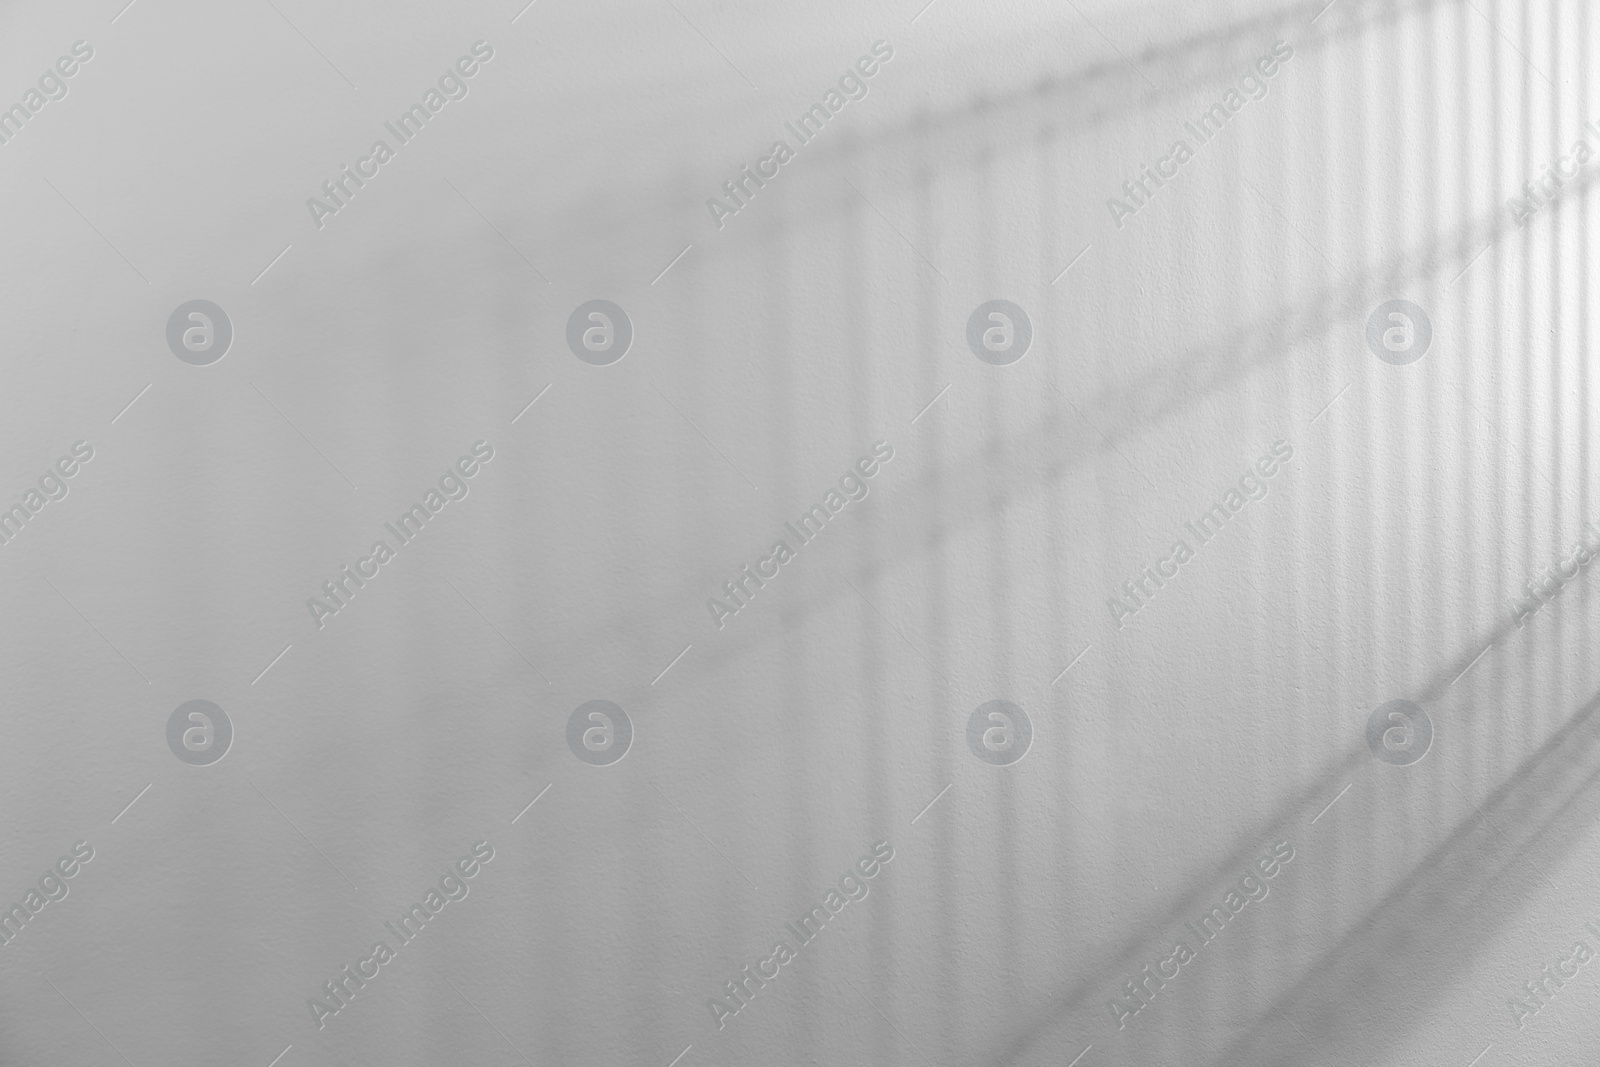 Photo of Light and shadows on white wall, space for text